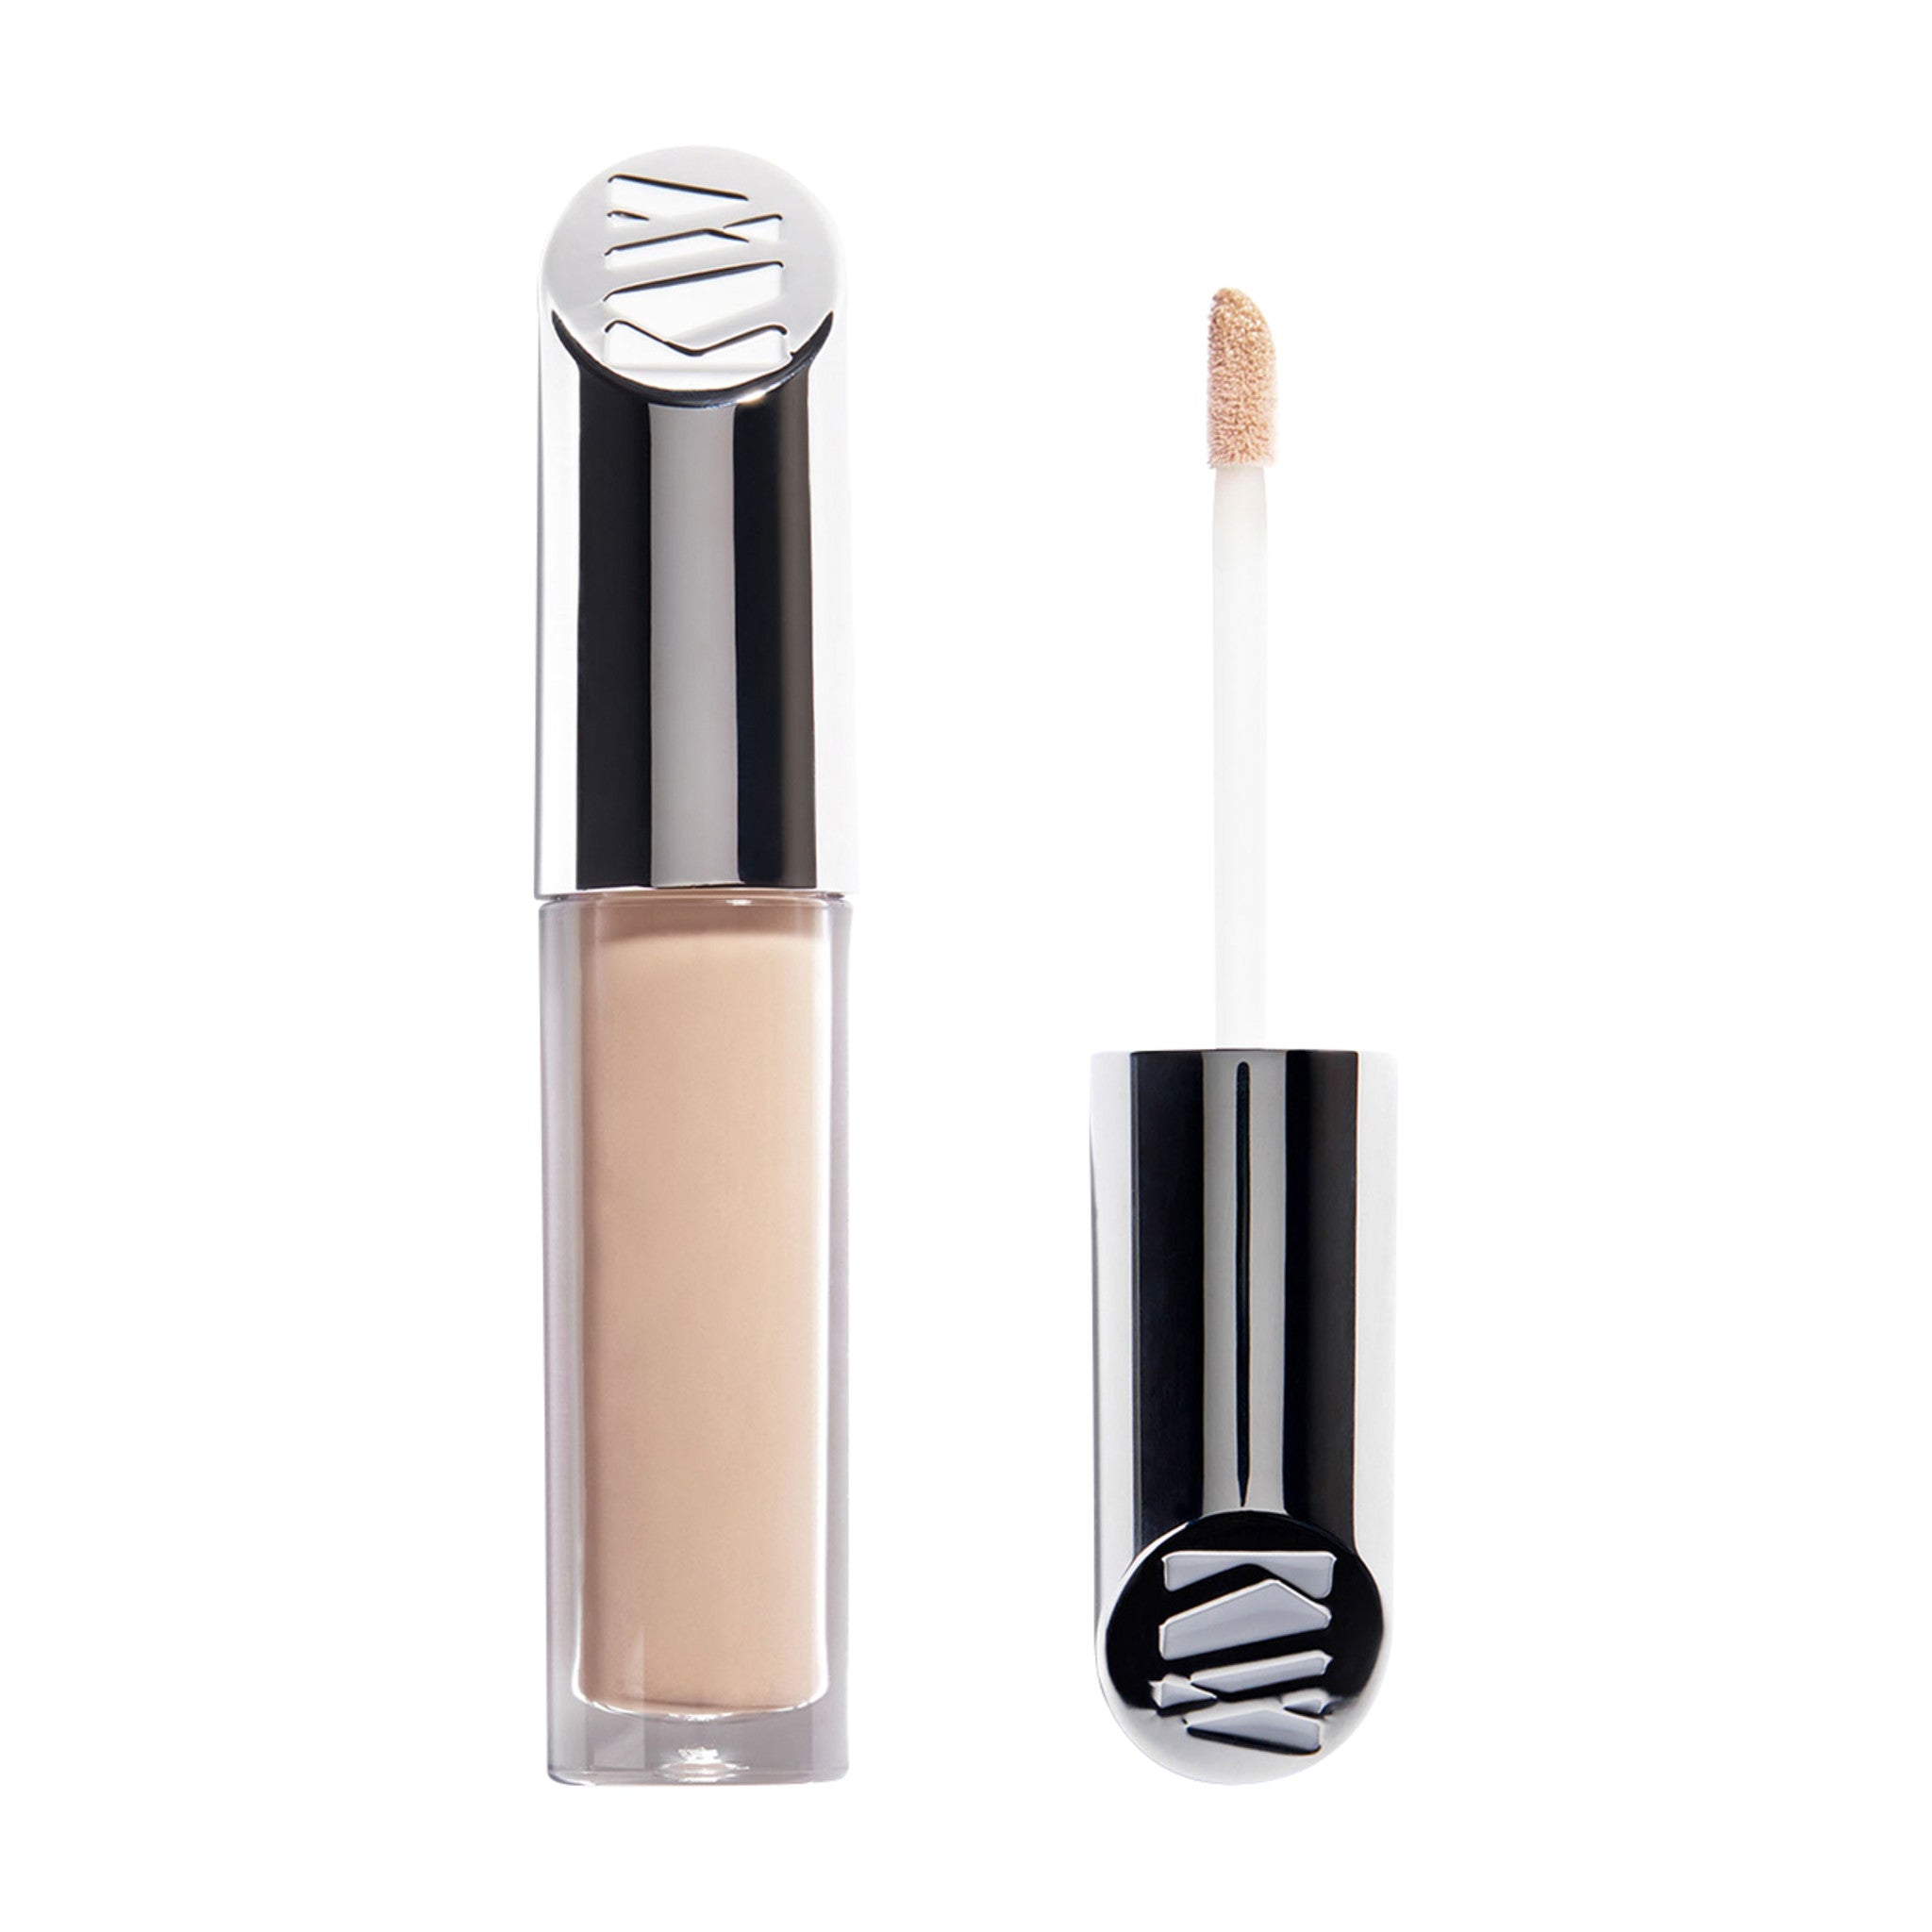 Kjaer Weis Invisible Touch Concealer Color/Shade variant: F110 main image. This product is for light warm pink complexions